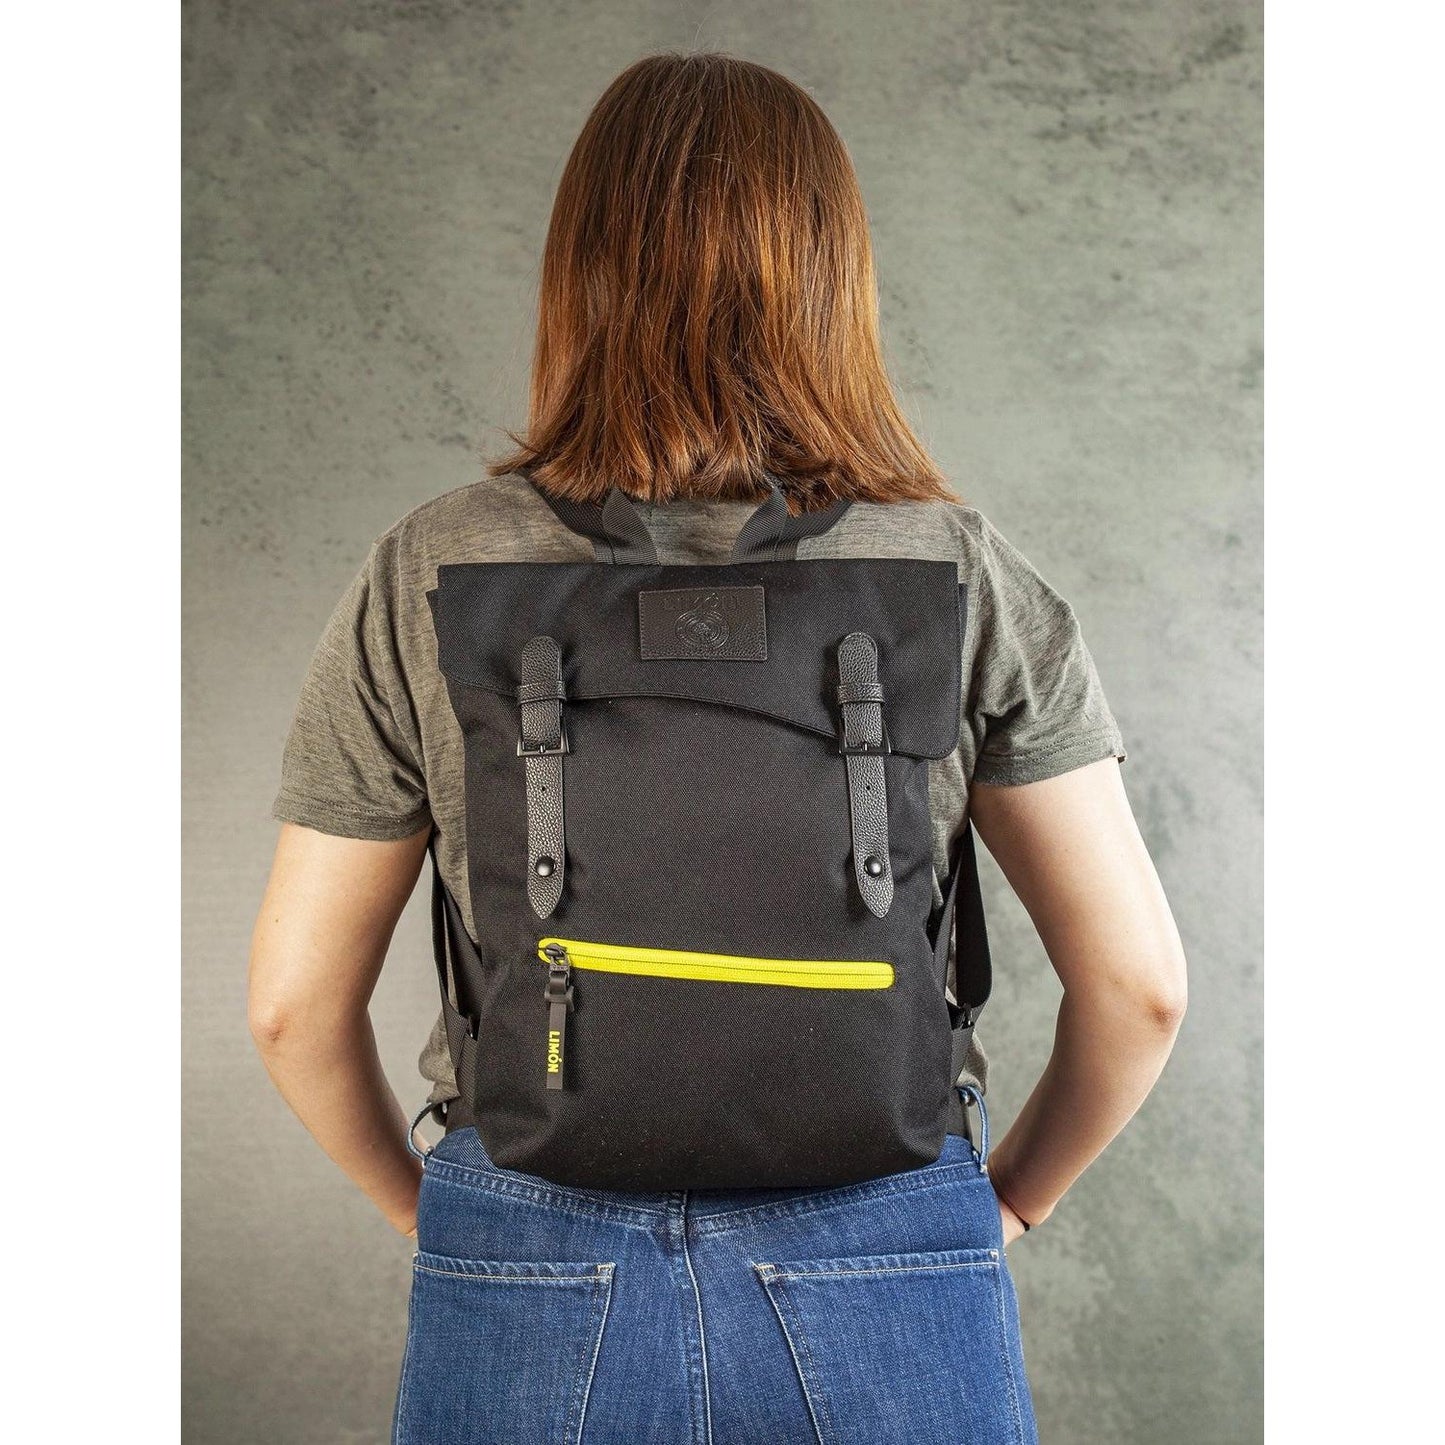 Buy Black Everyday Backpack 9.5L | Ideal for the City Commute - at Sacred Remedy Online